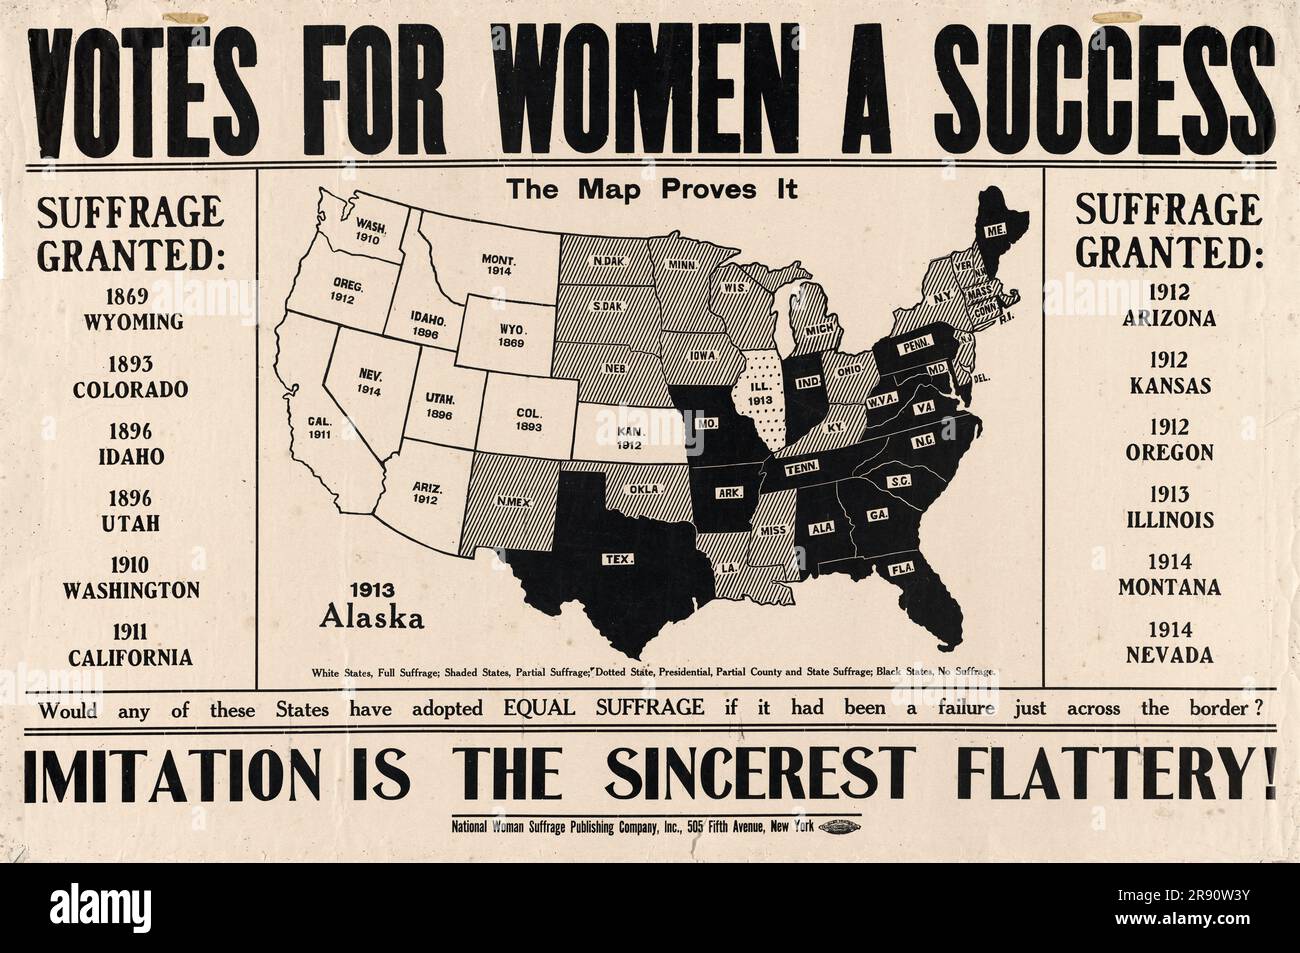 Votes for Women A Success. Imitation is the Sincerest Flattery. A camapign poster for women's suffrage in the USA showing a map of the country with the states that had allowed universal franchise and those who had not. Stock Photo